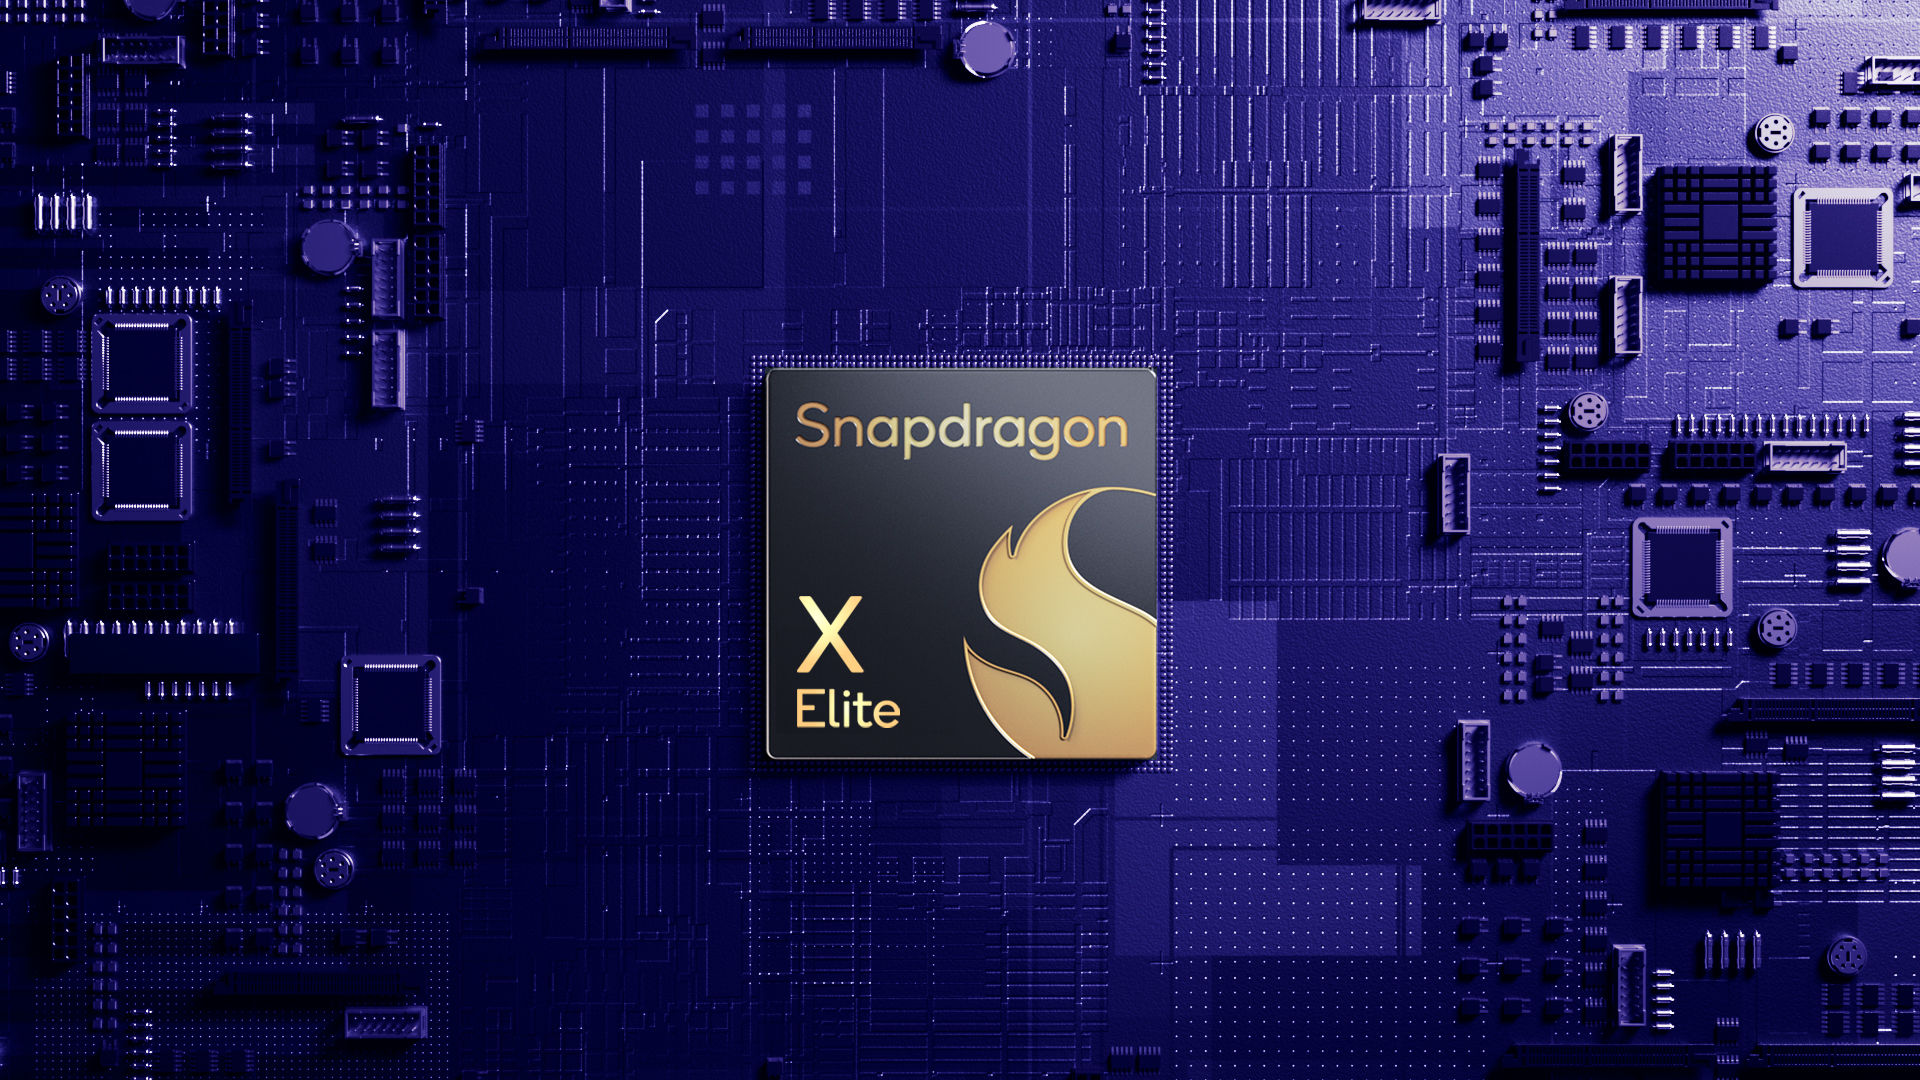 Qualcomm's claims regarding the performance of the Snapdragon X Elite chip were not entirely honest